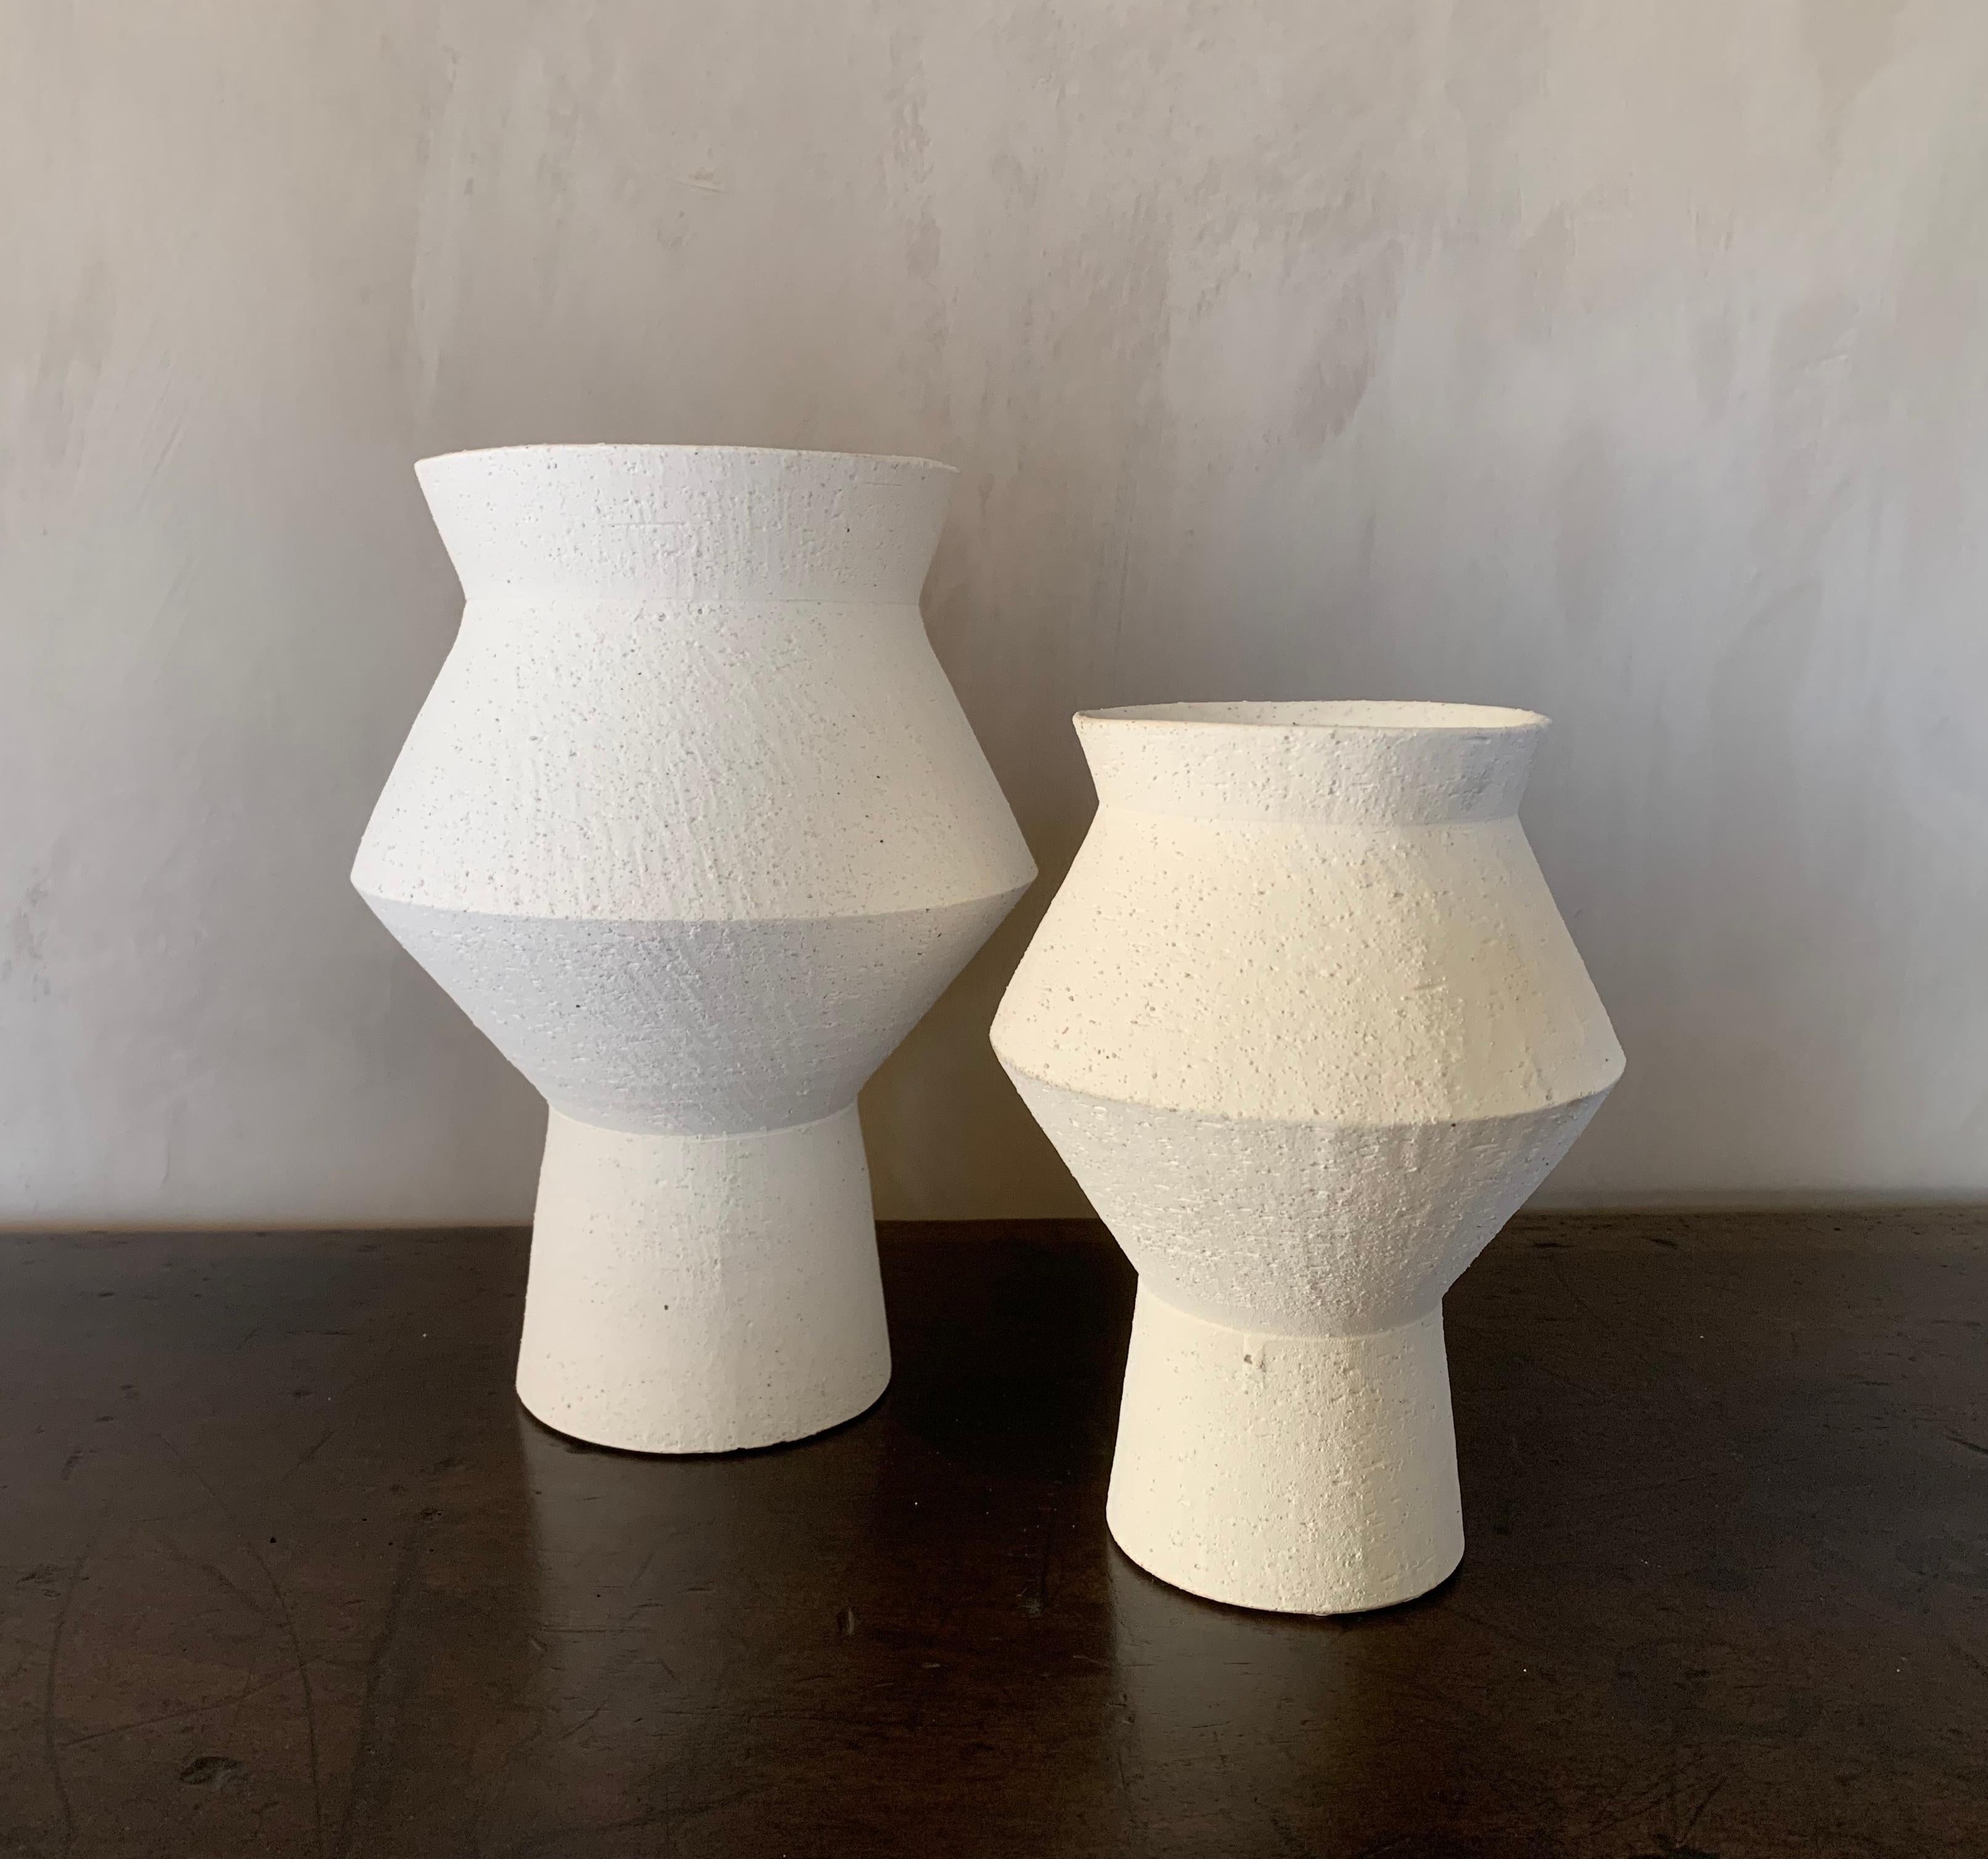 A set of 2 contemporary geometric ceramic vases. The outside mat unglazed with the interior spickle glazed. Loverly proportions, classic techniques and modernist design.